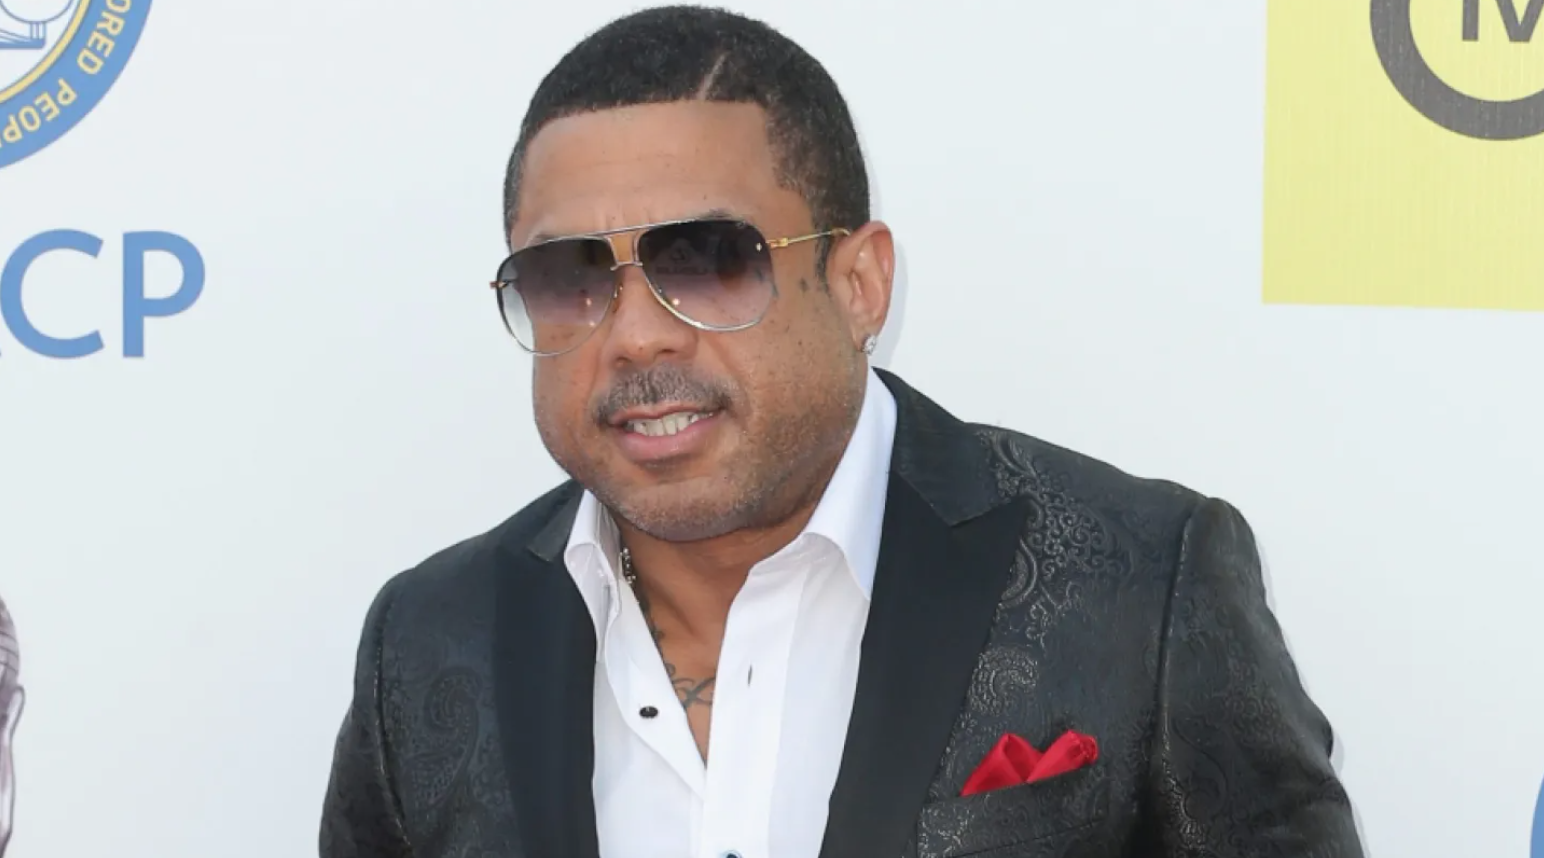 Benzino Doesn’t Think R. Kelly “Should Rot In Jail” For Committing Child Sex Crimes